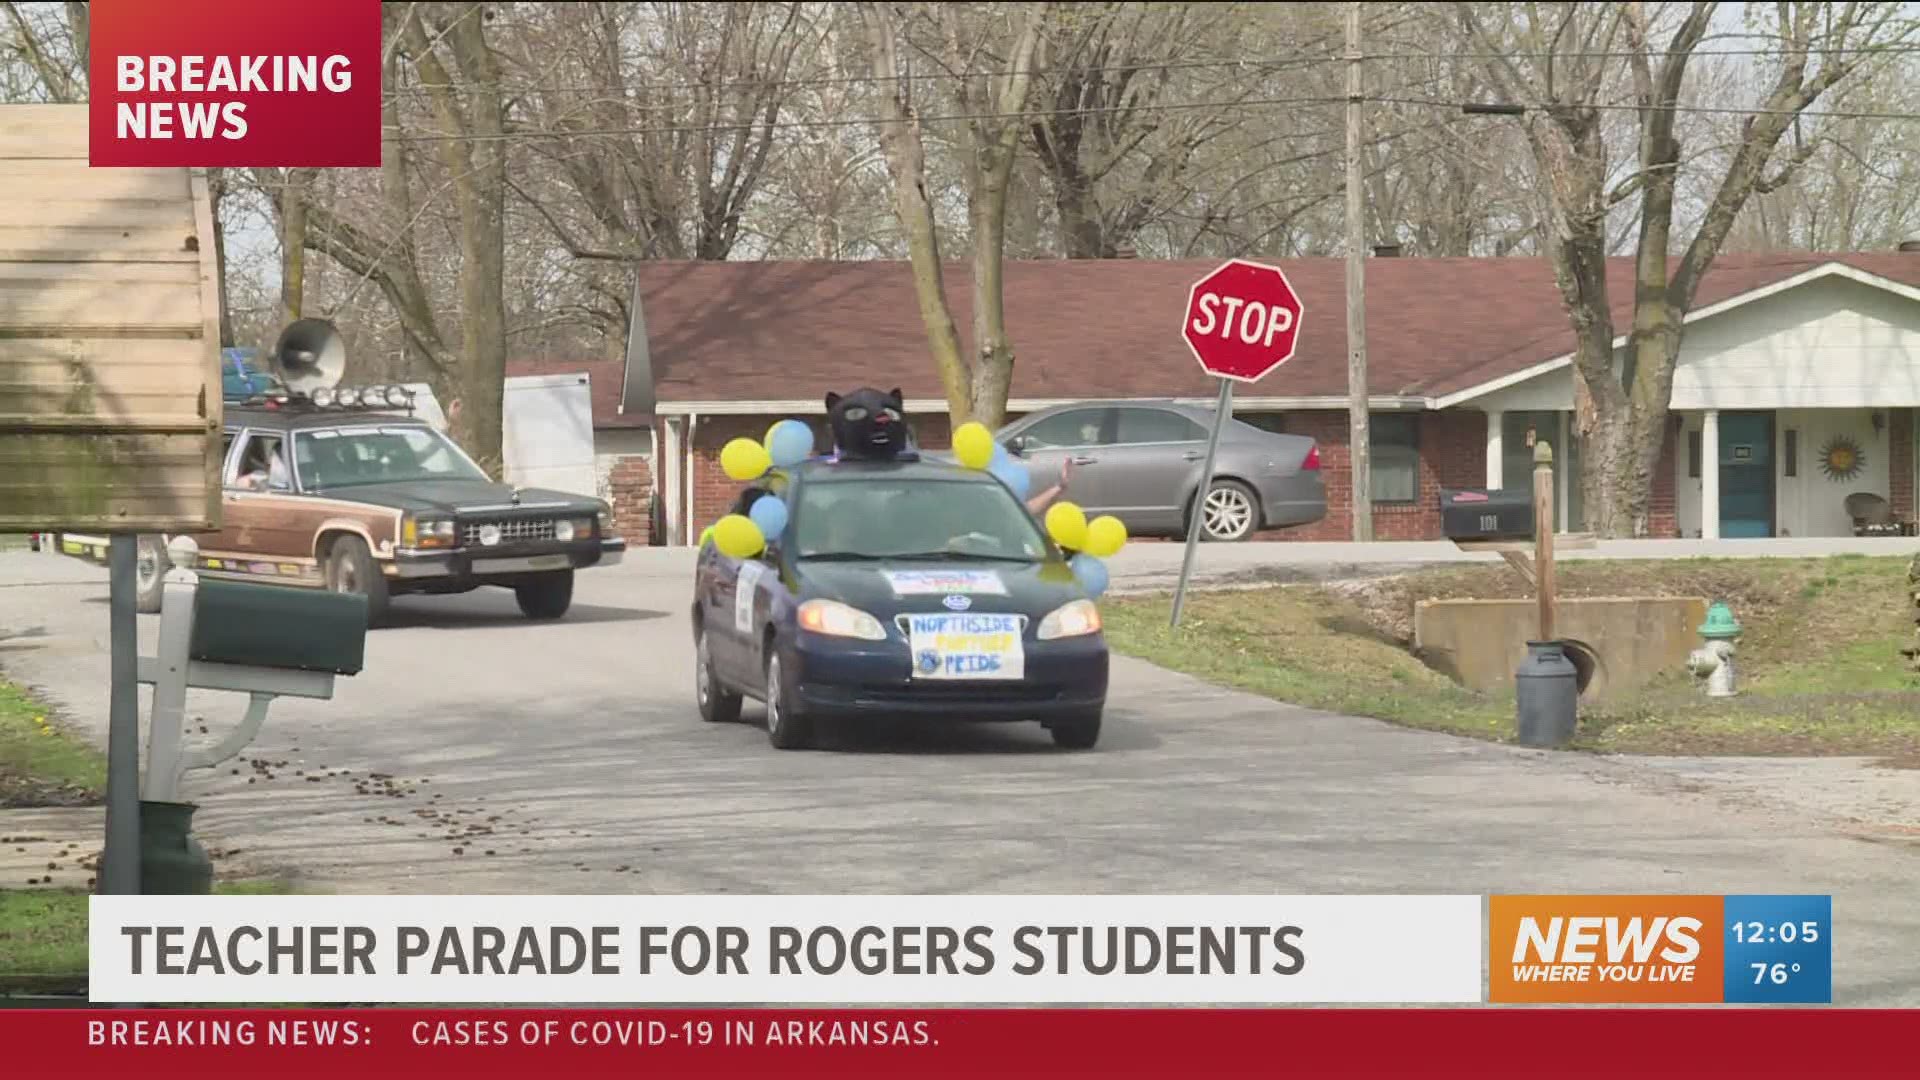 Rogers Northside Elementary teachers wanted students to know they were missed, so they held a parade and drove through students' neighborhoods to wave hello.